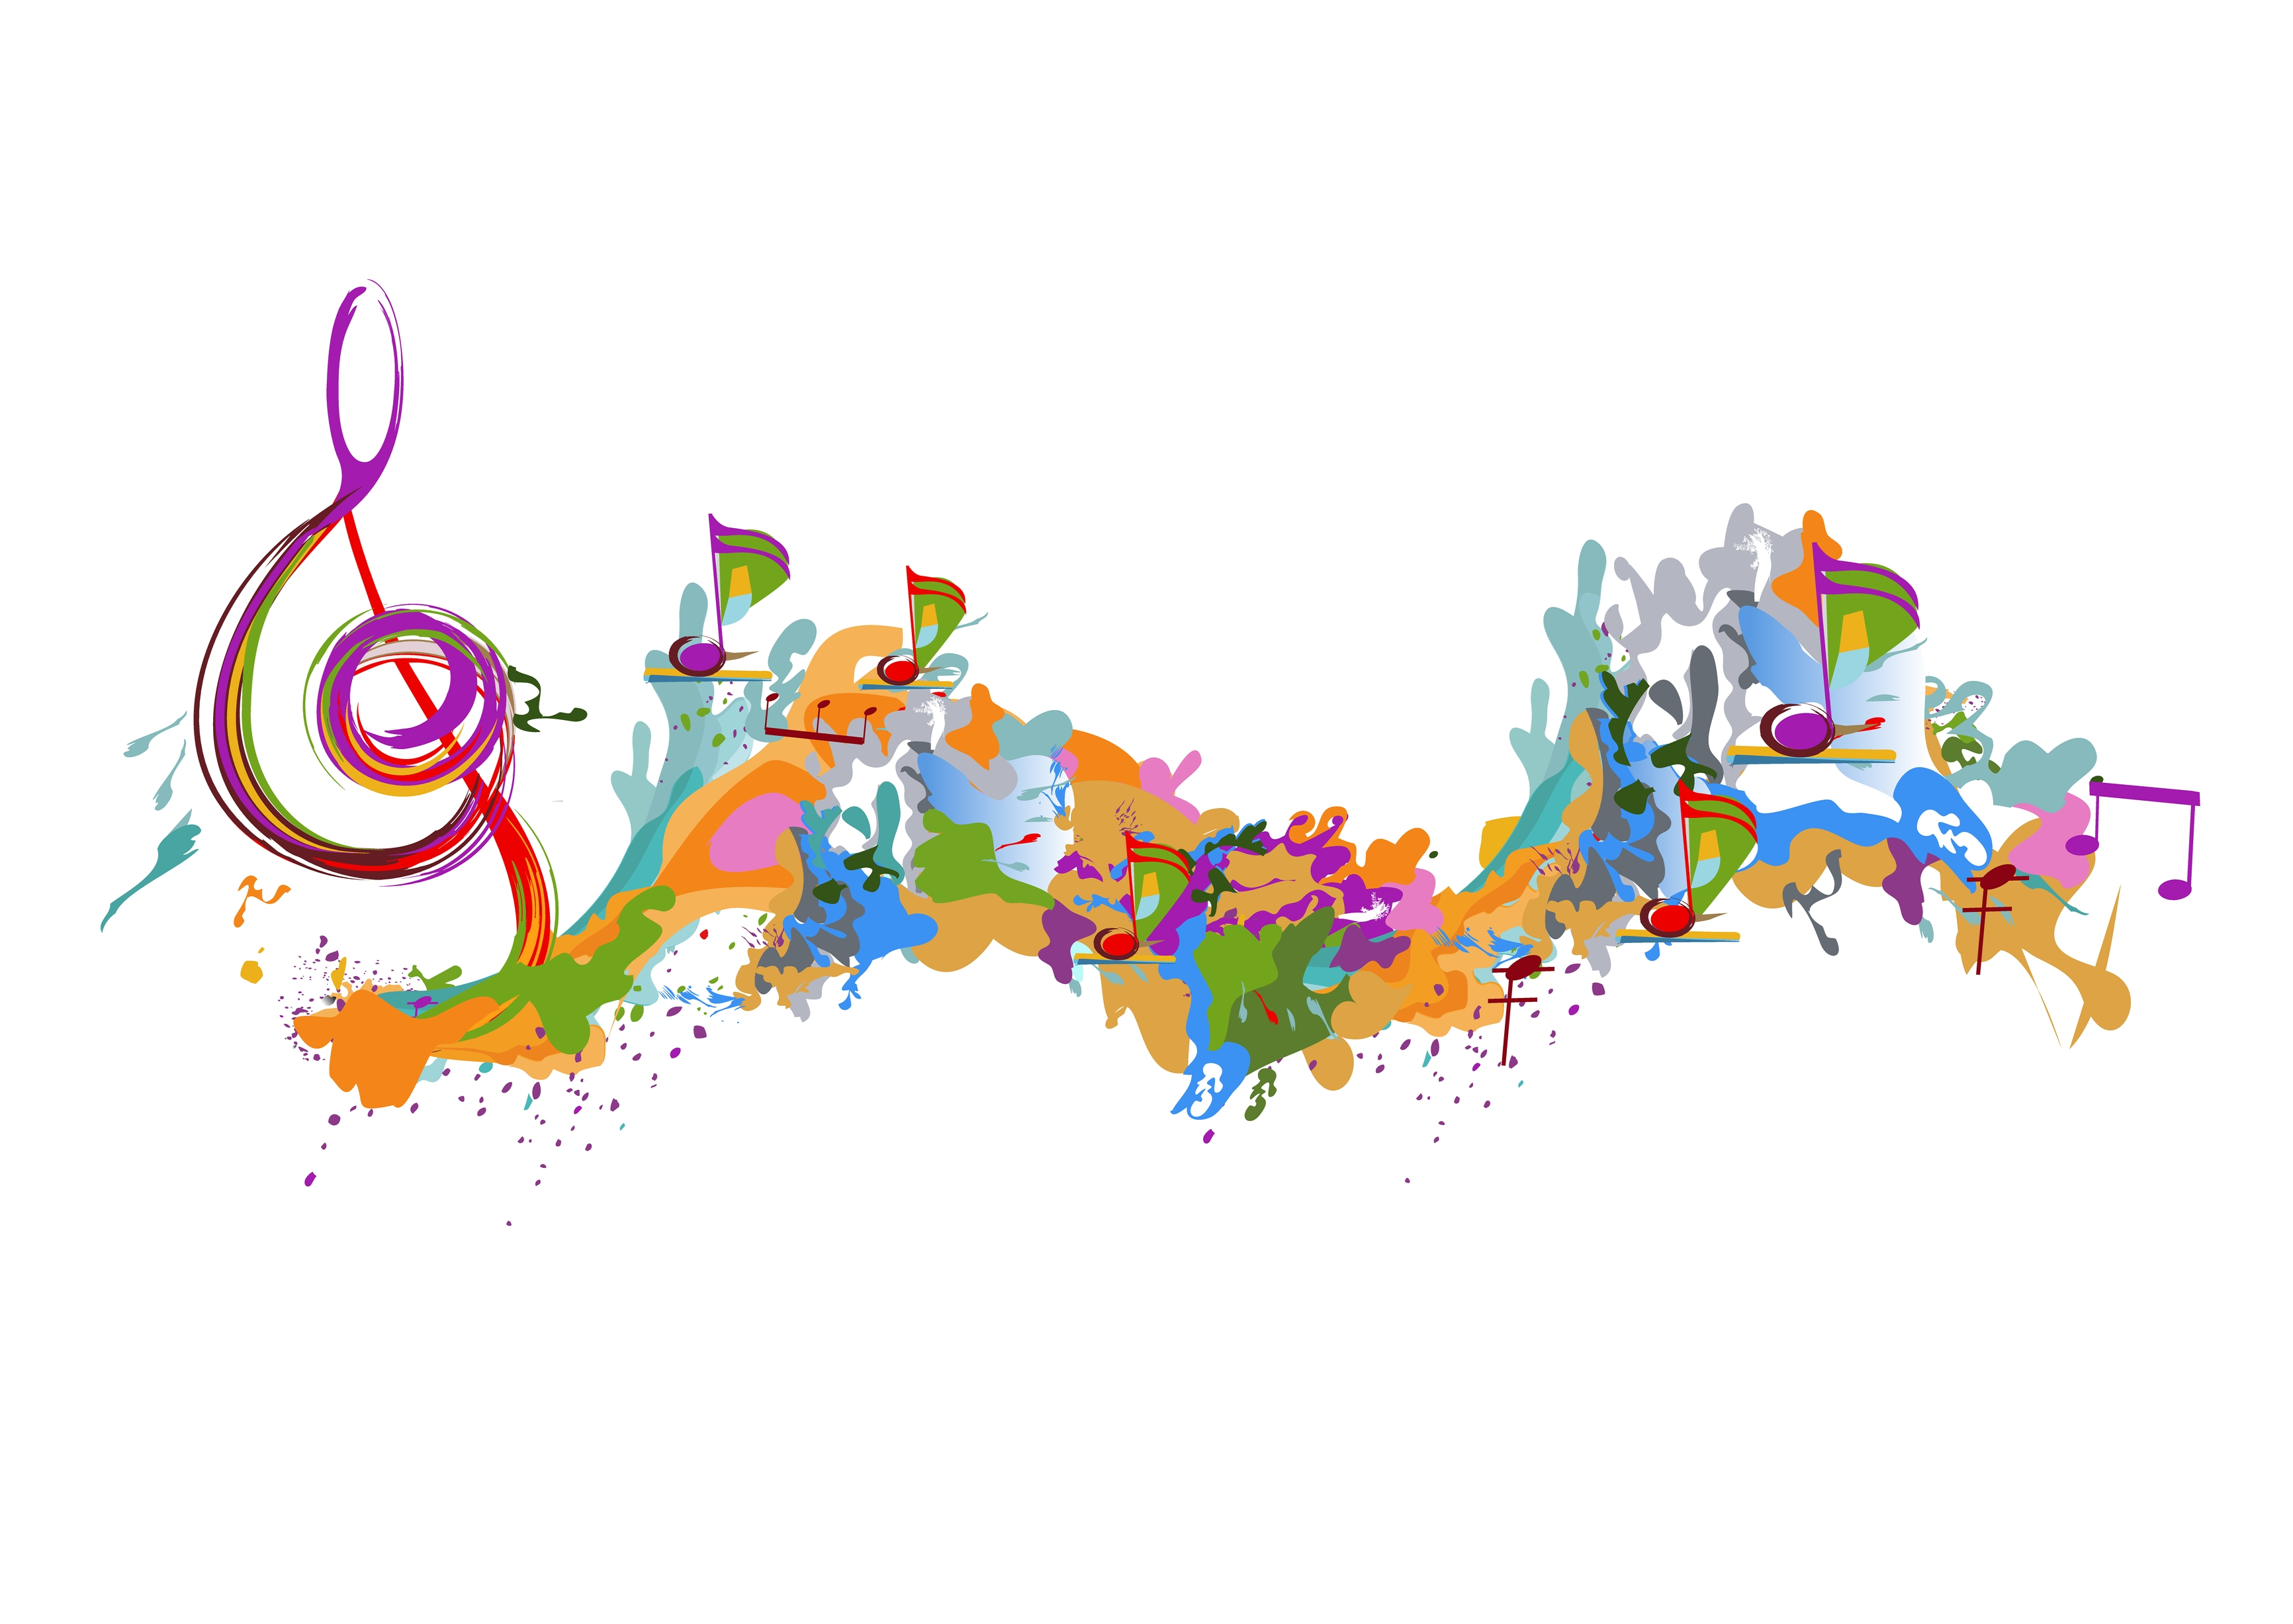 Multi color musical notes swirling